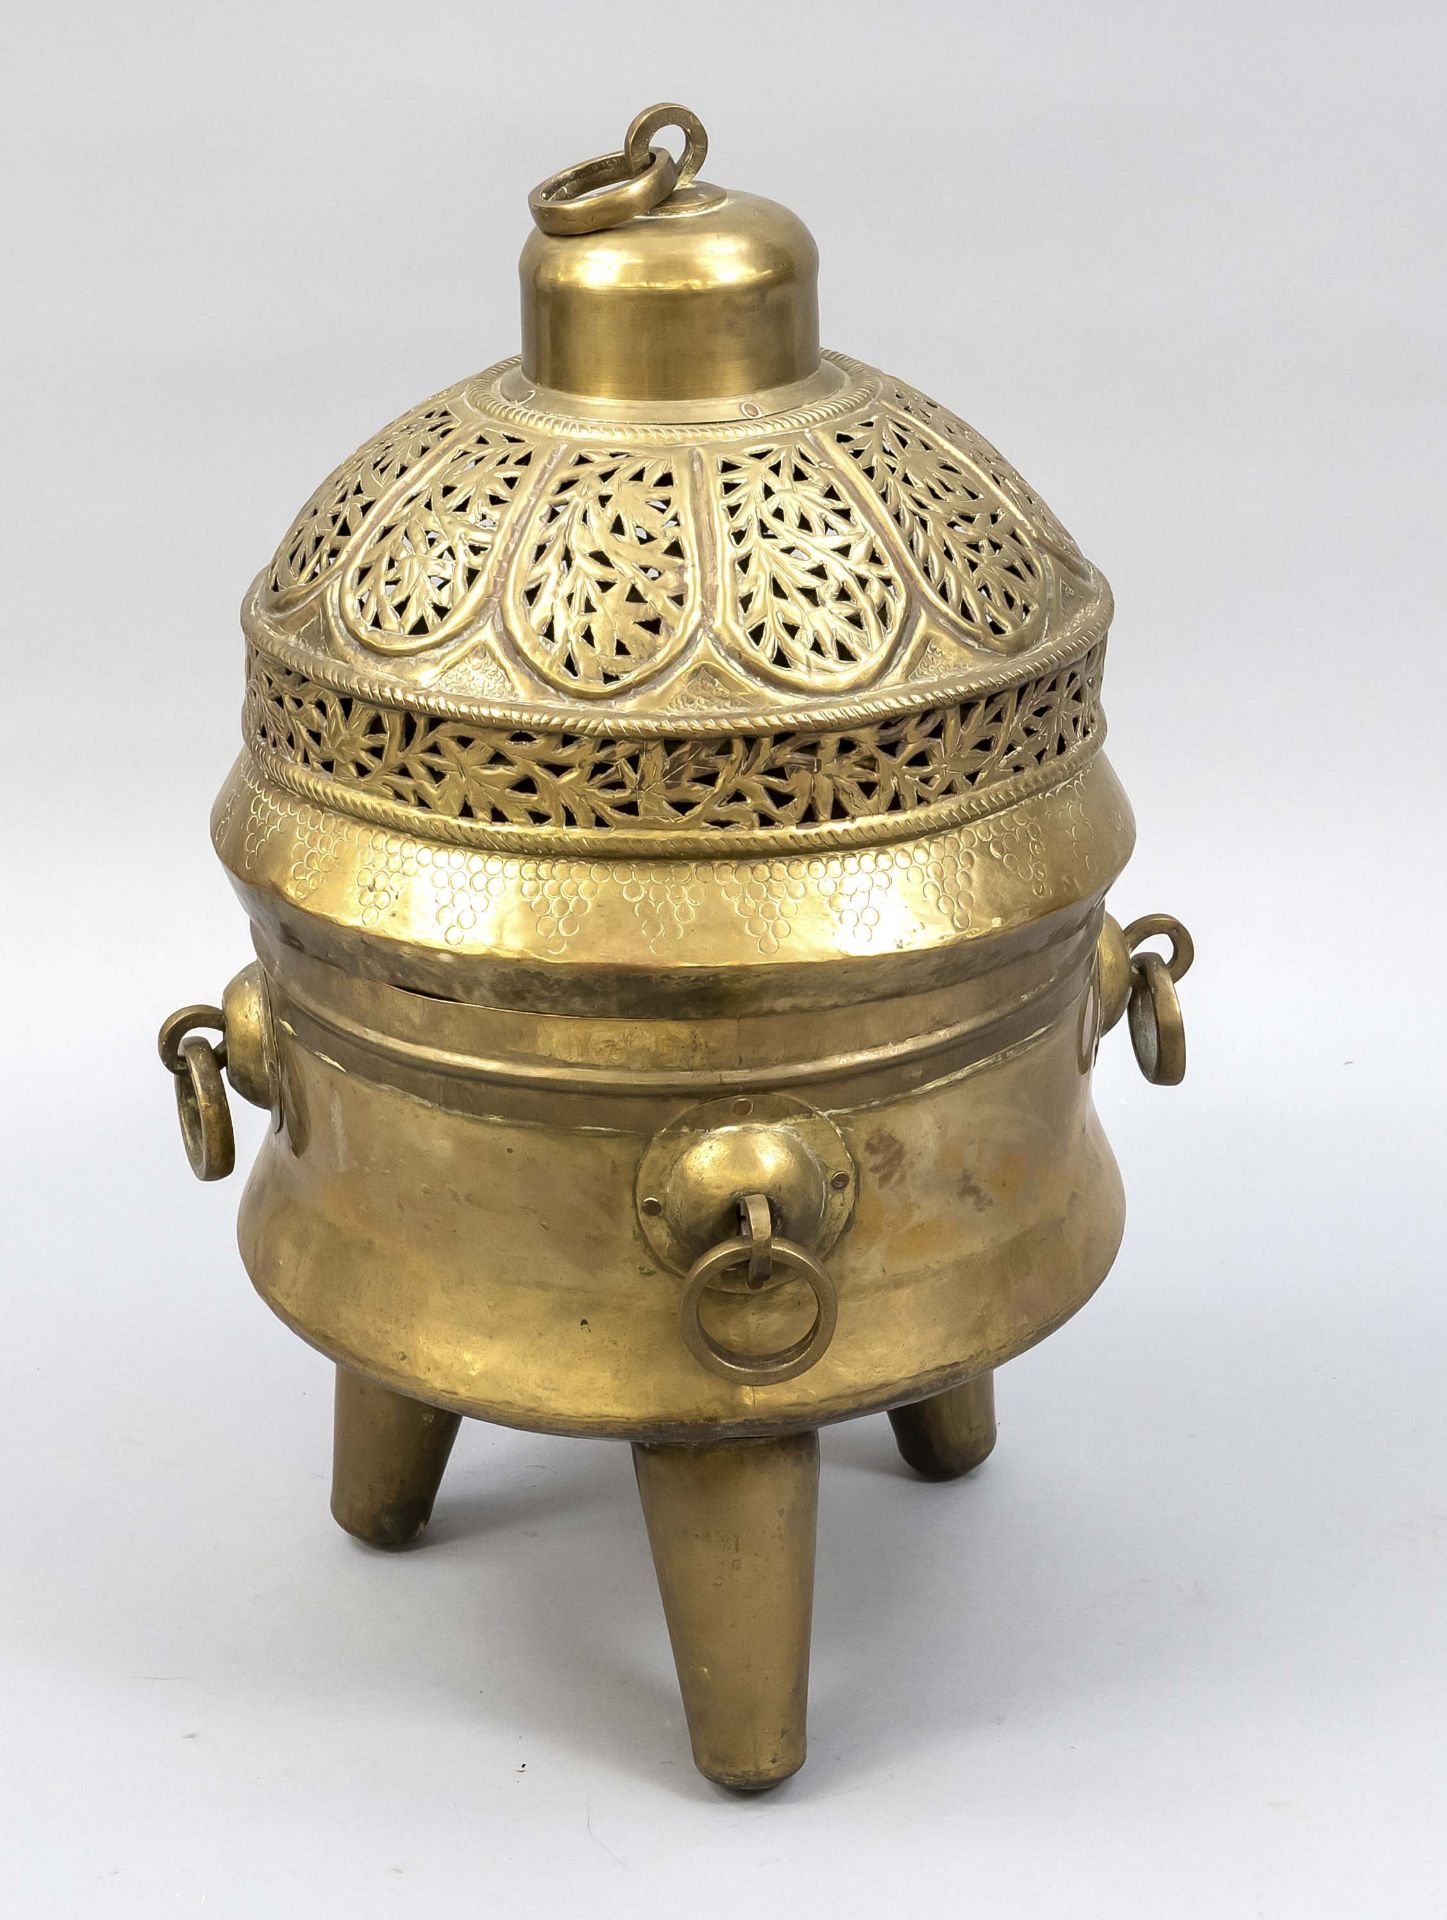 Large brass censer (for incense?), 19th/20th c., brass. Vessel with ring handles on 3 feet, openwork